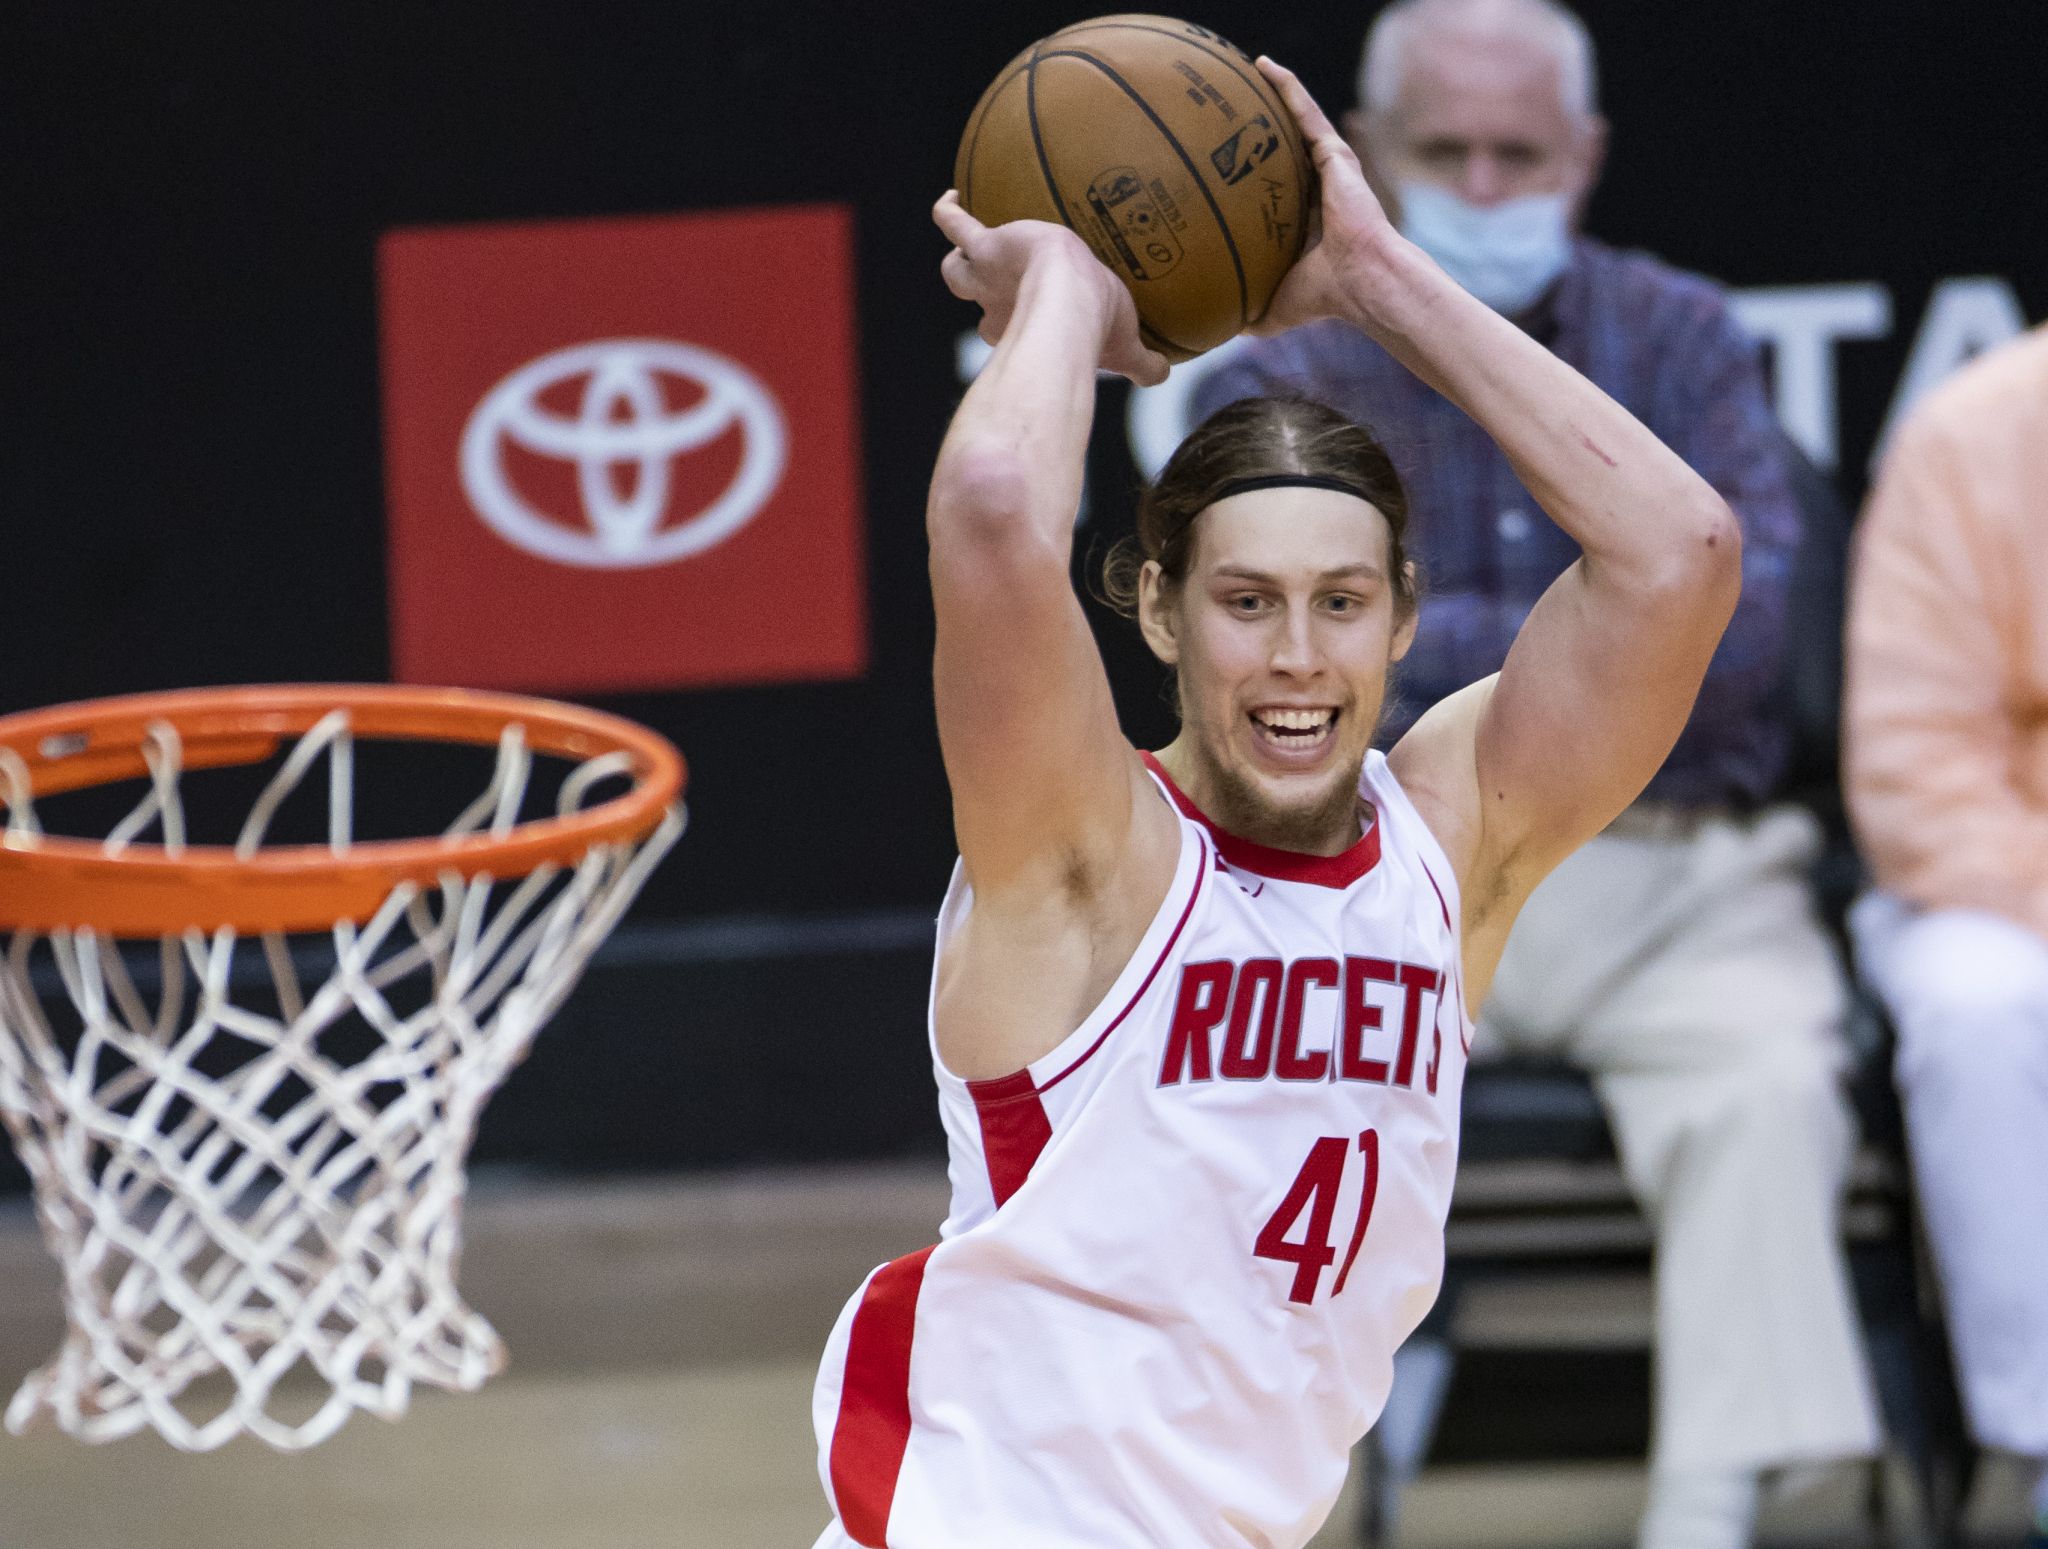 NBA players Dwight Powell and Kelly Olynyk during the Basketball